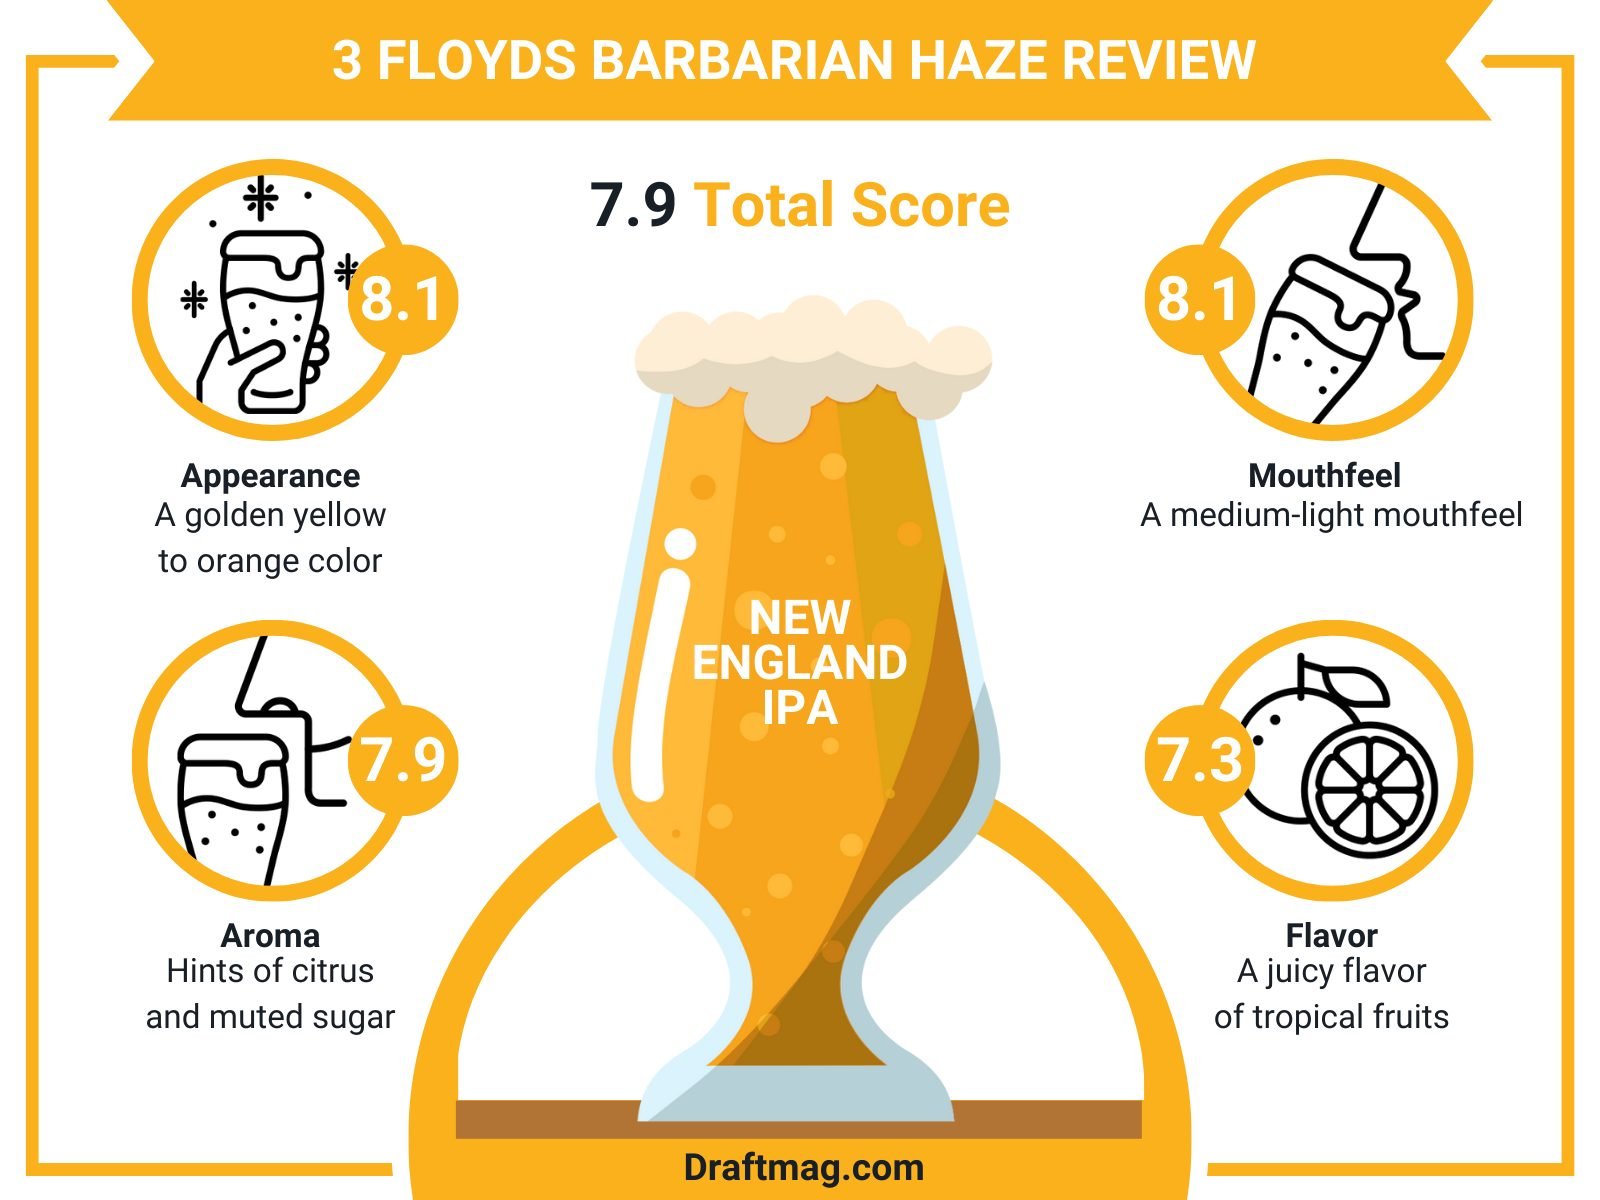 3 Floyds Review Infographic